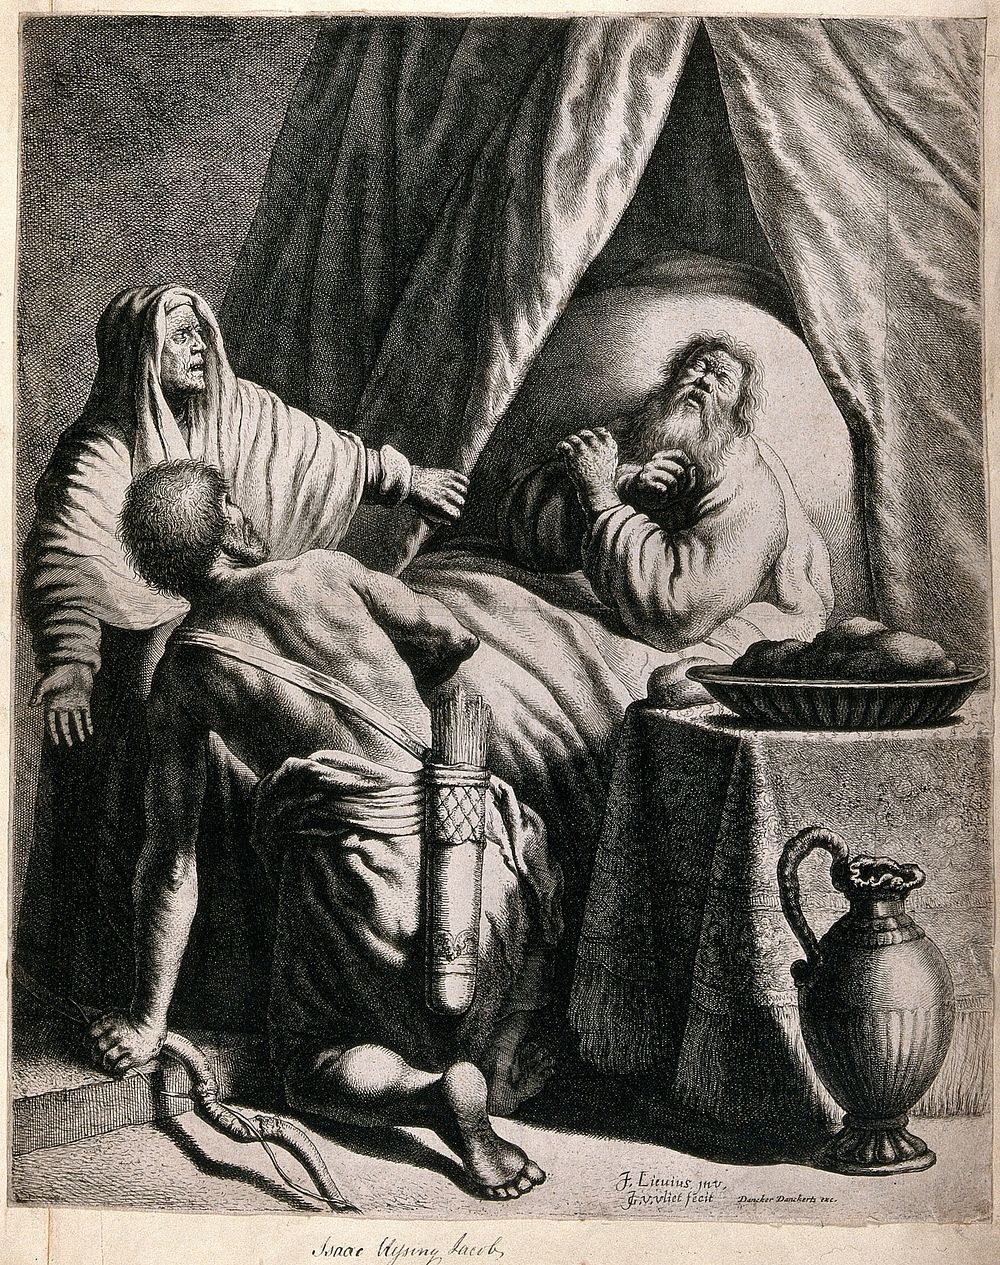 Jacob blessing Isaac. Etching by J.J. van Vliet after J. Lievens.